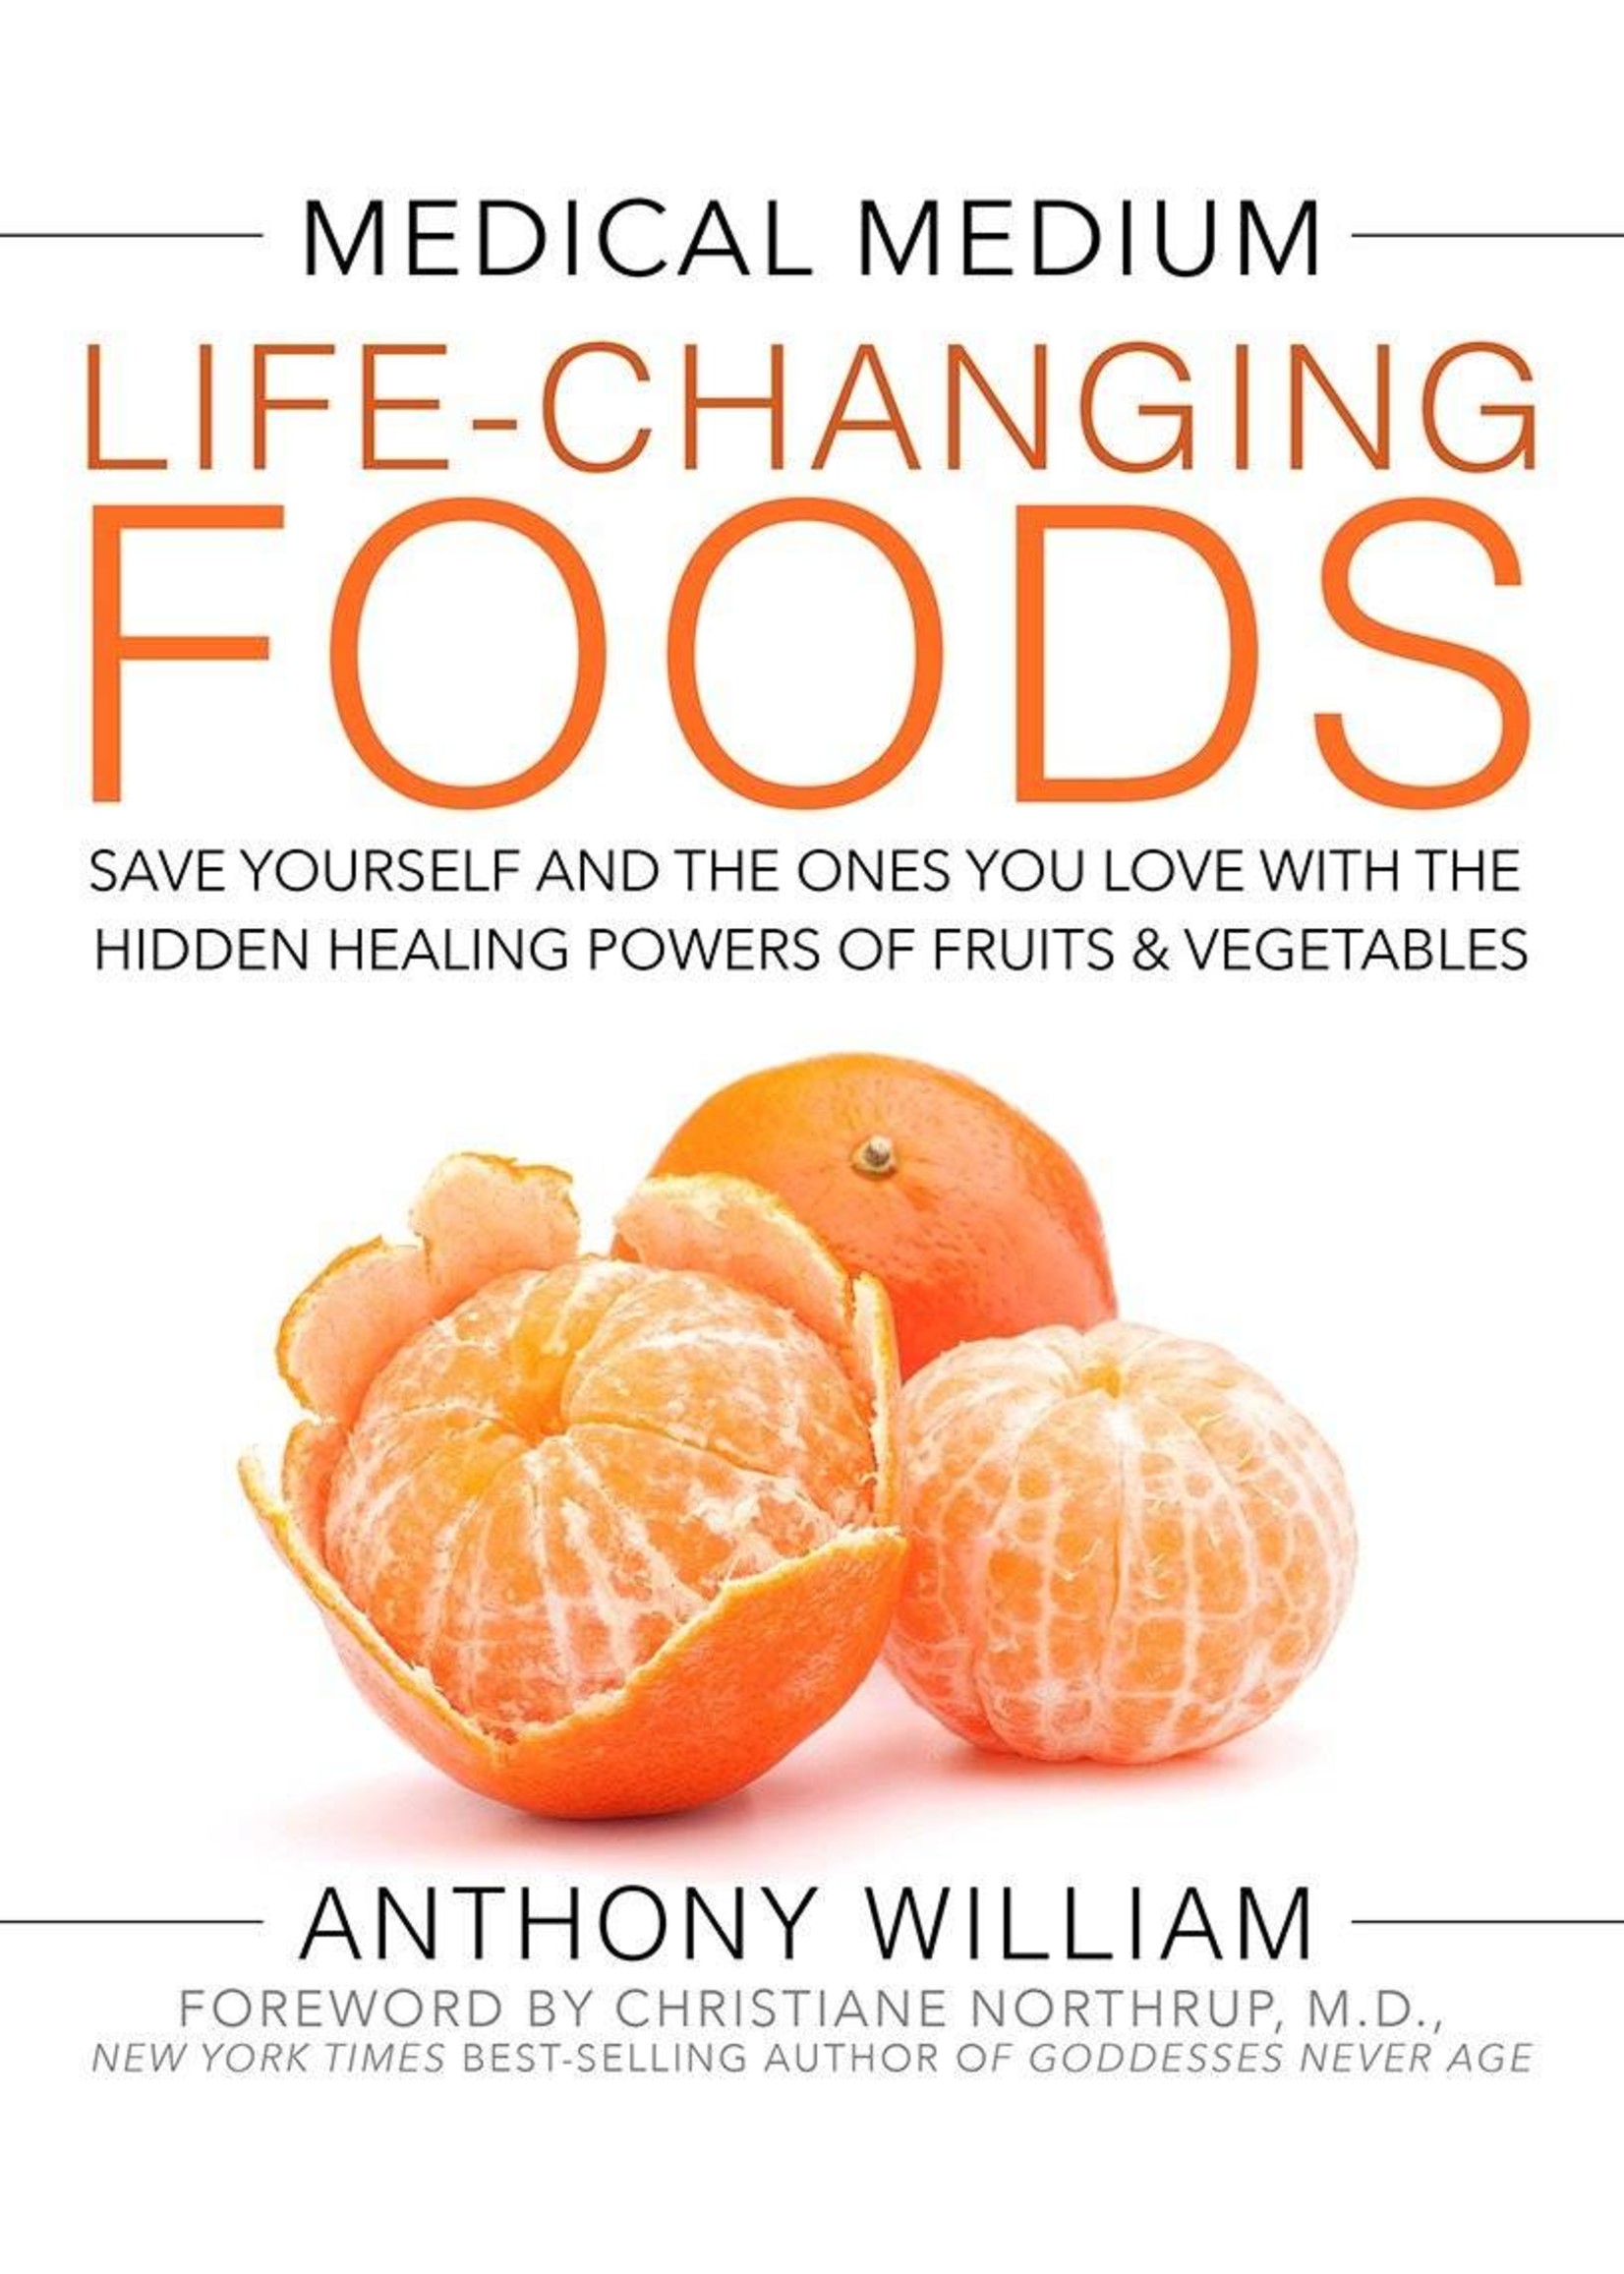 Medical Medium Life-Changing Foods | Save Yourself and the Ones You Love with the Hidden Healing Powers of Fruits & Vegetables